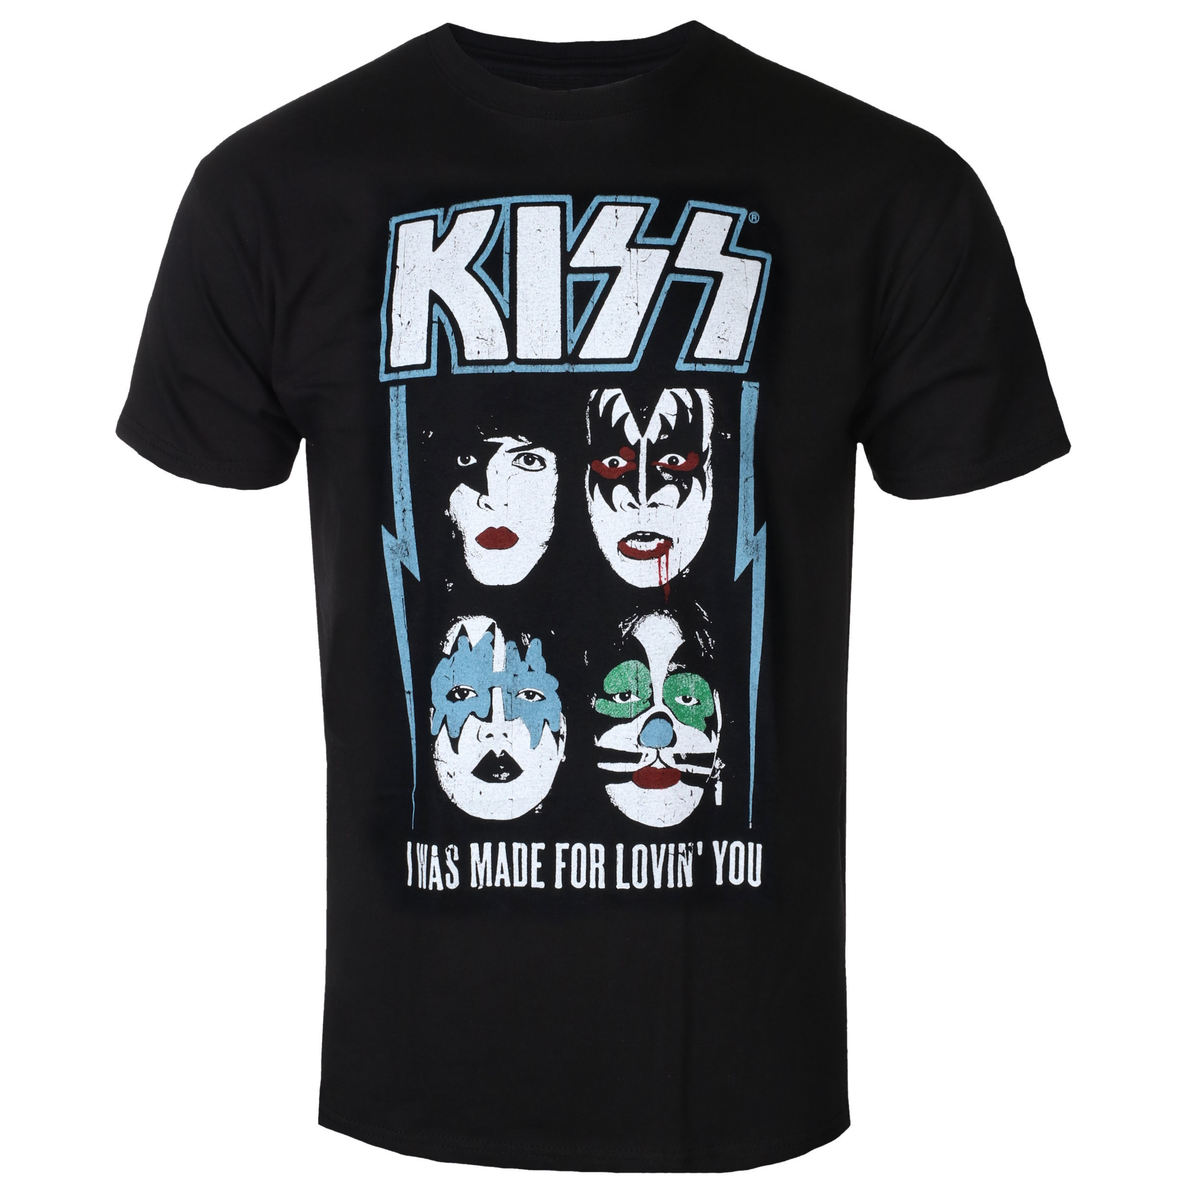 KISS - Made For Lovin' You (XXL)